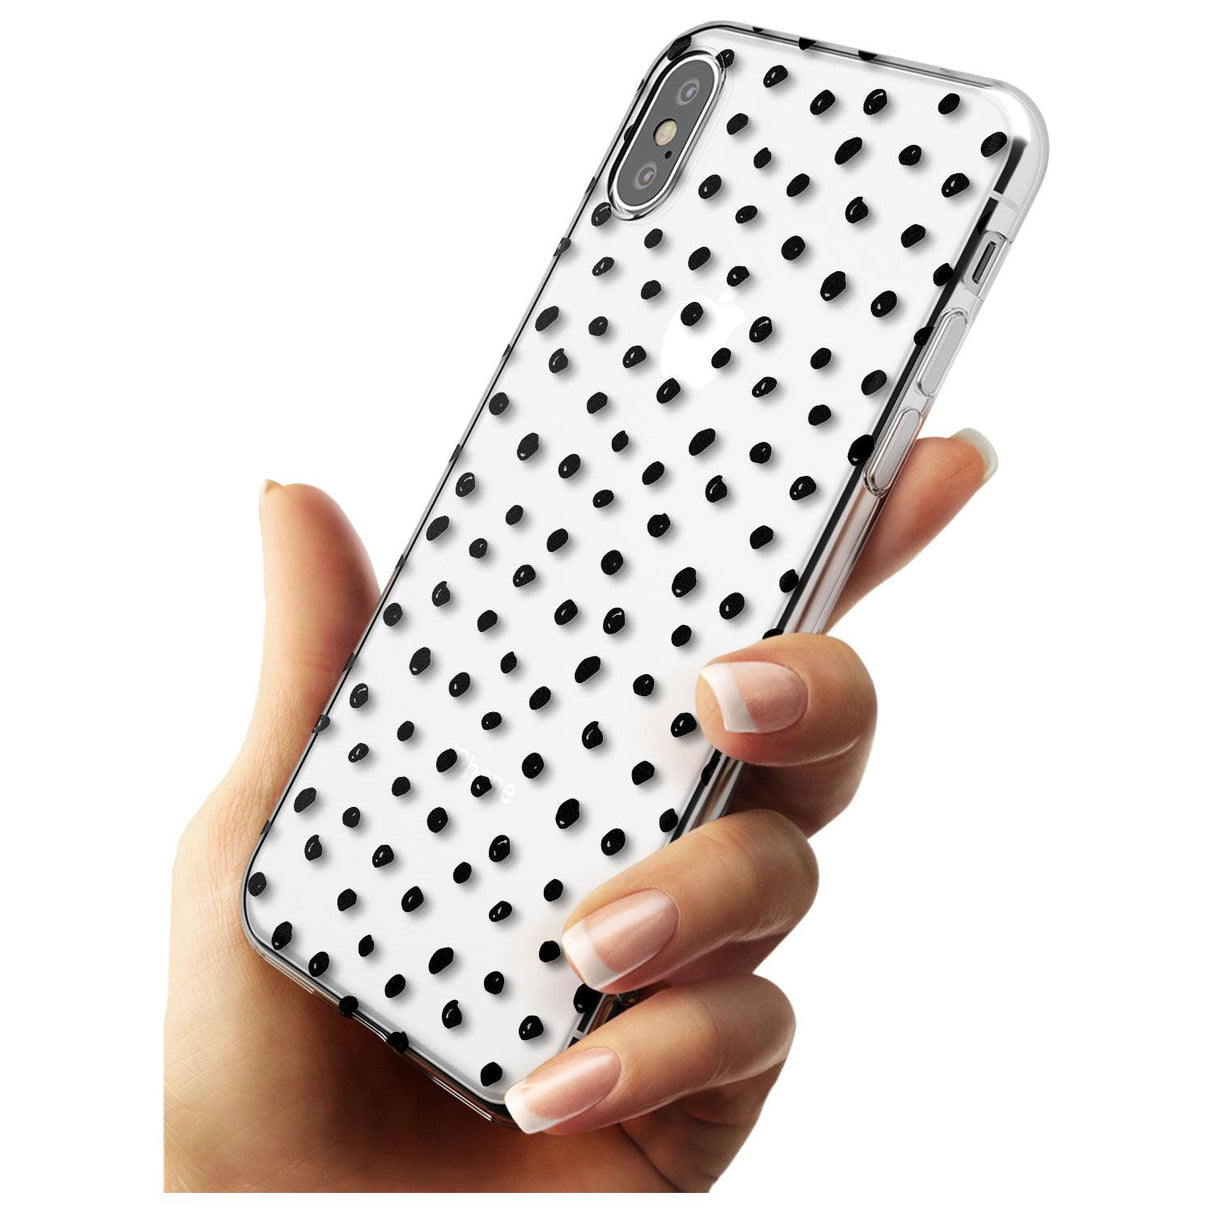 Messy Black Dot Pattern Black Impact Phone Case for iPhone X XS Max XR